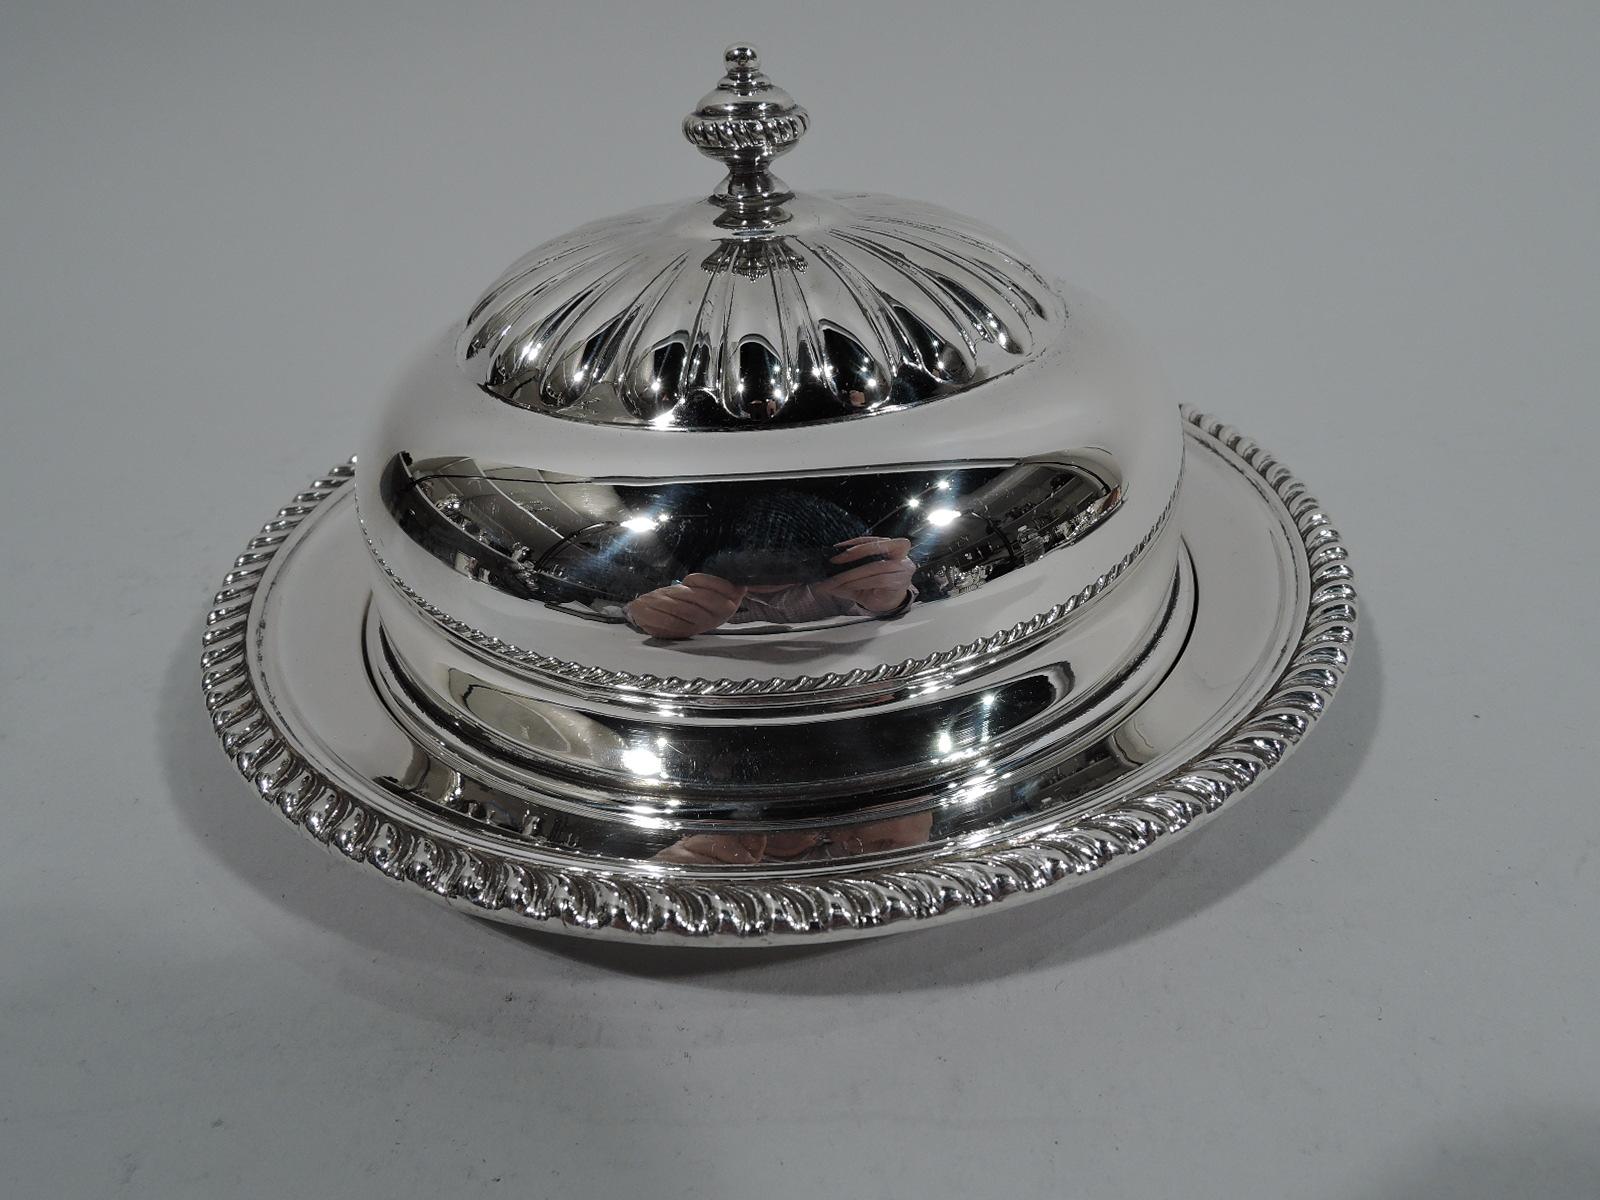 Georgian-style sterling silver butter dish. Made by Birks in Canada in 1950. Round and deep well, and gadrooned rim. Cover domed; beaded finial surrounded by alternating flutes and gadroons. Cut-glass liner. Fully marked including London date letter